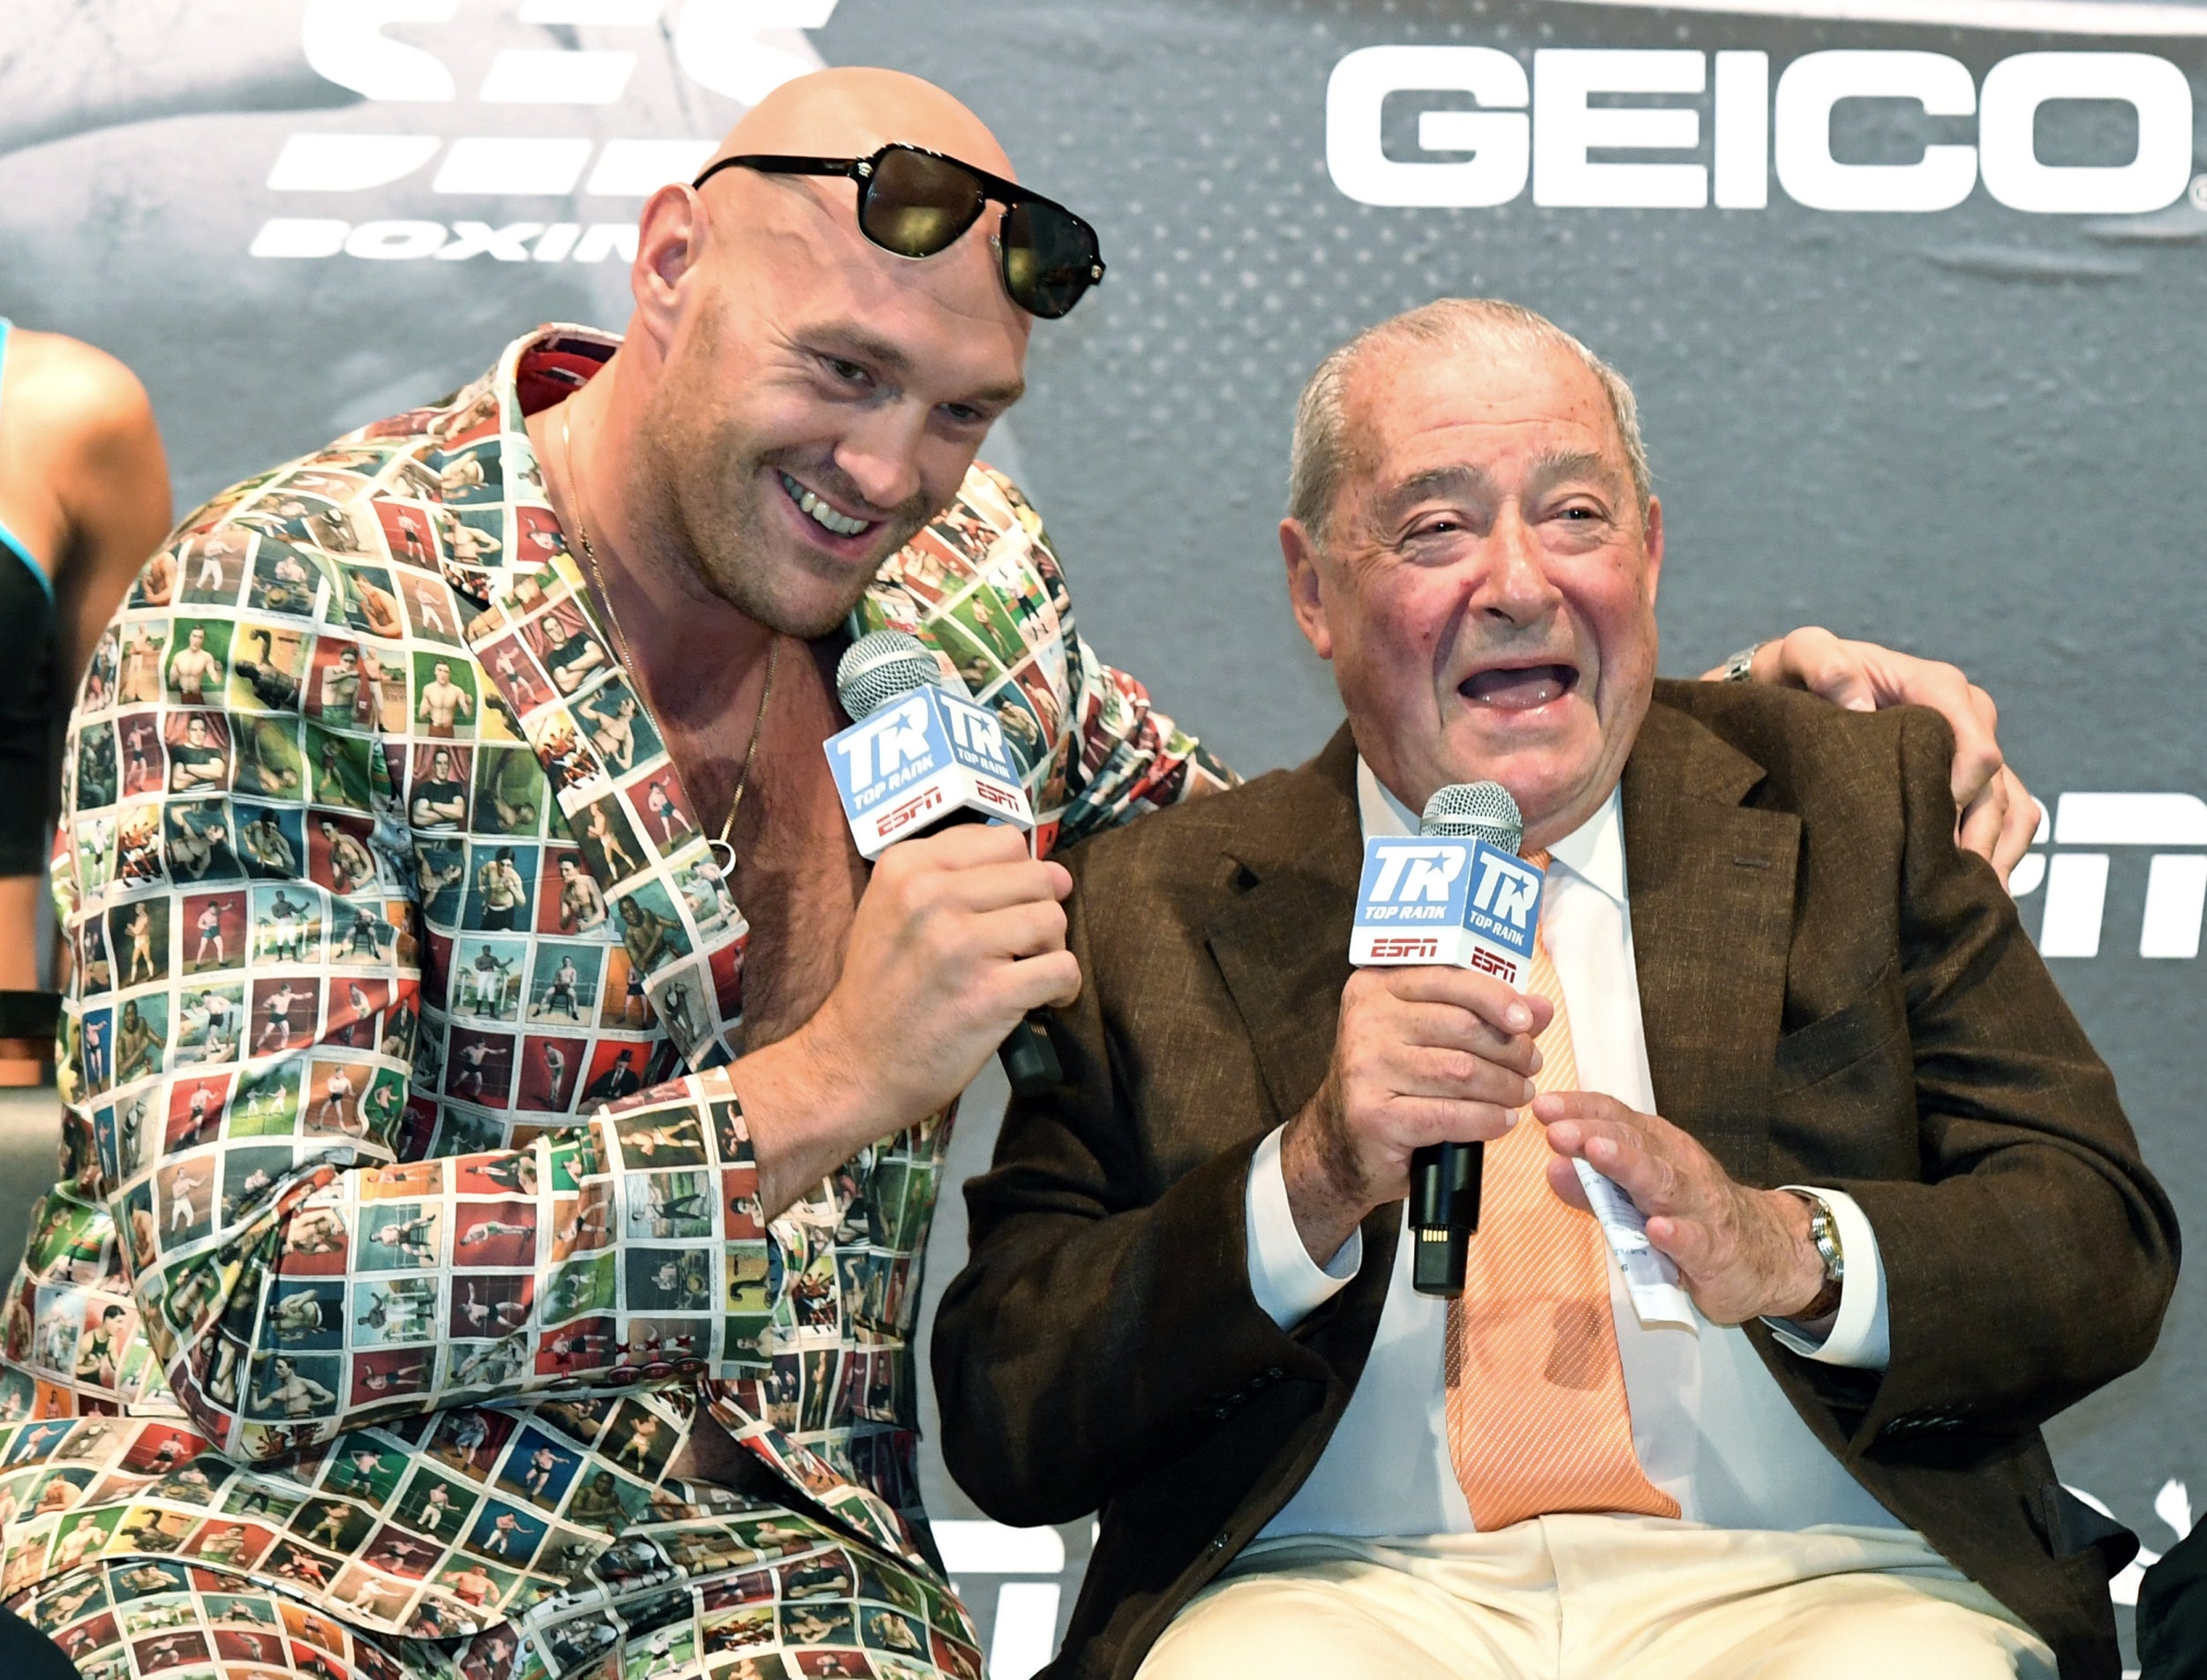 Fury laughs with his co-promoter Bob Arum (Getty)